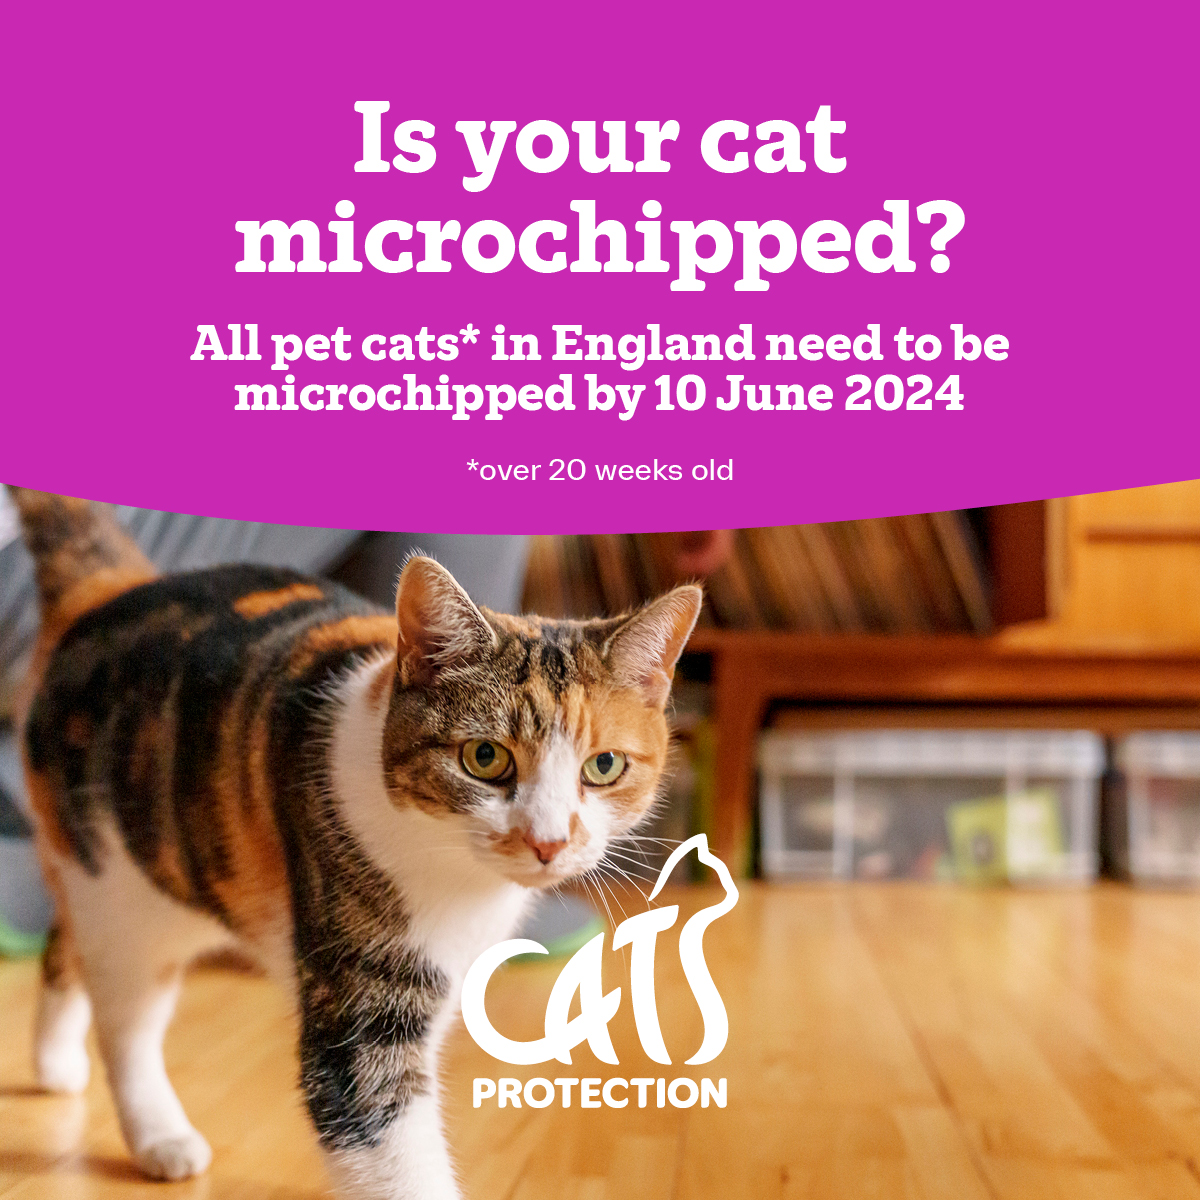 There's just 30 days until microchipping becomes compulsory by law for pet cats in England. Learn more about why we have campaigned for this change and how this could affect you if your cat isn't microchipped by 10 June 2024 here: spr.ly/Microchipping